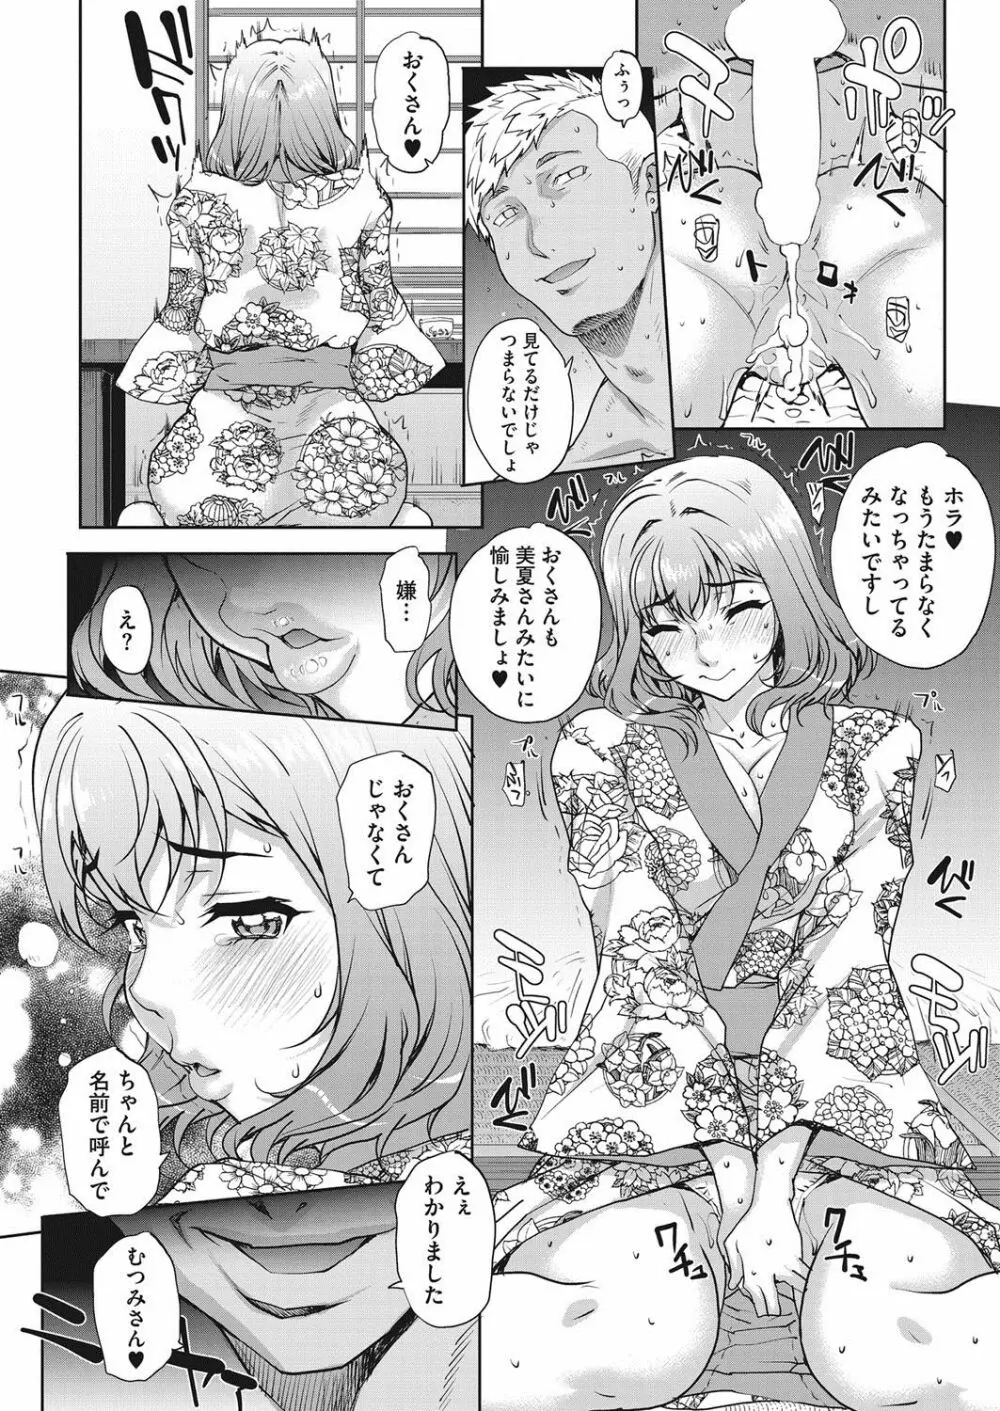 [Carn] Tanshinfunin ~Sisters~ Ch 1-7 69ページ